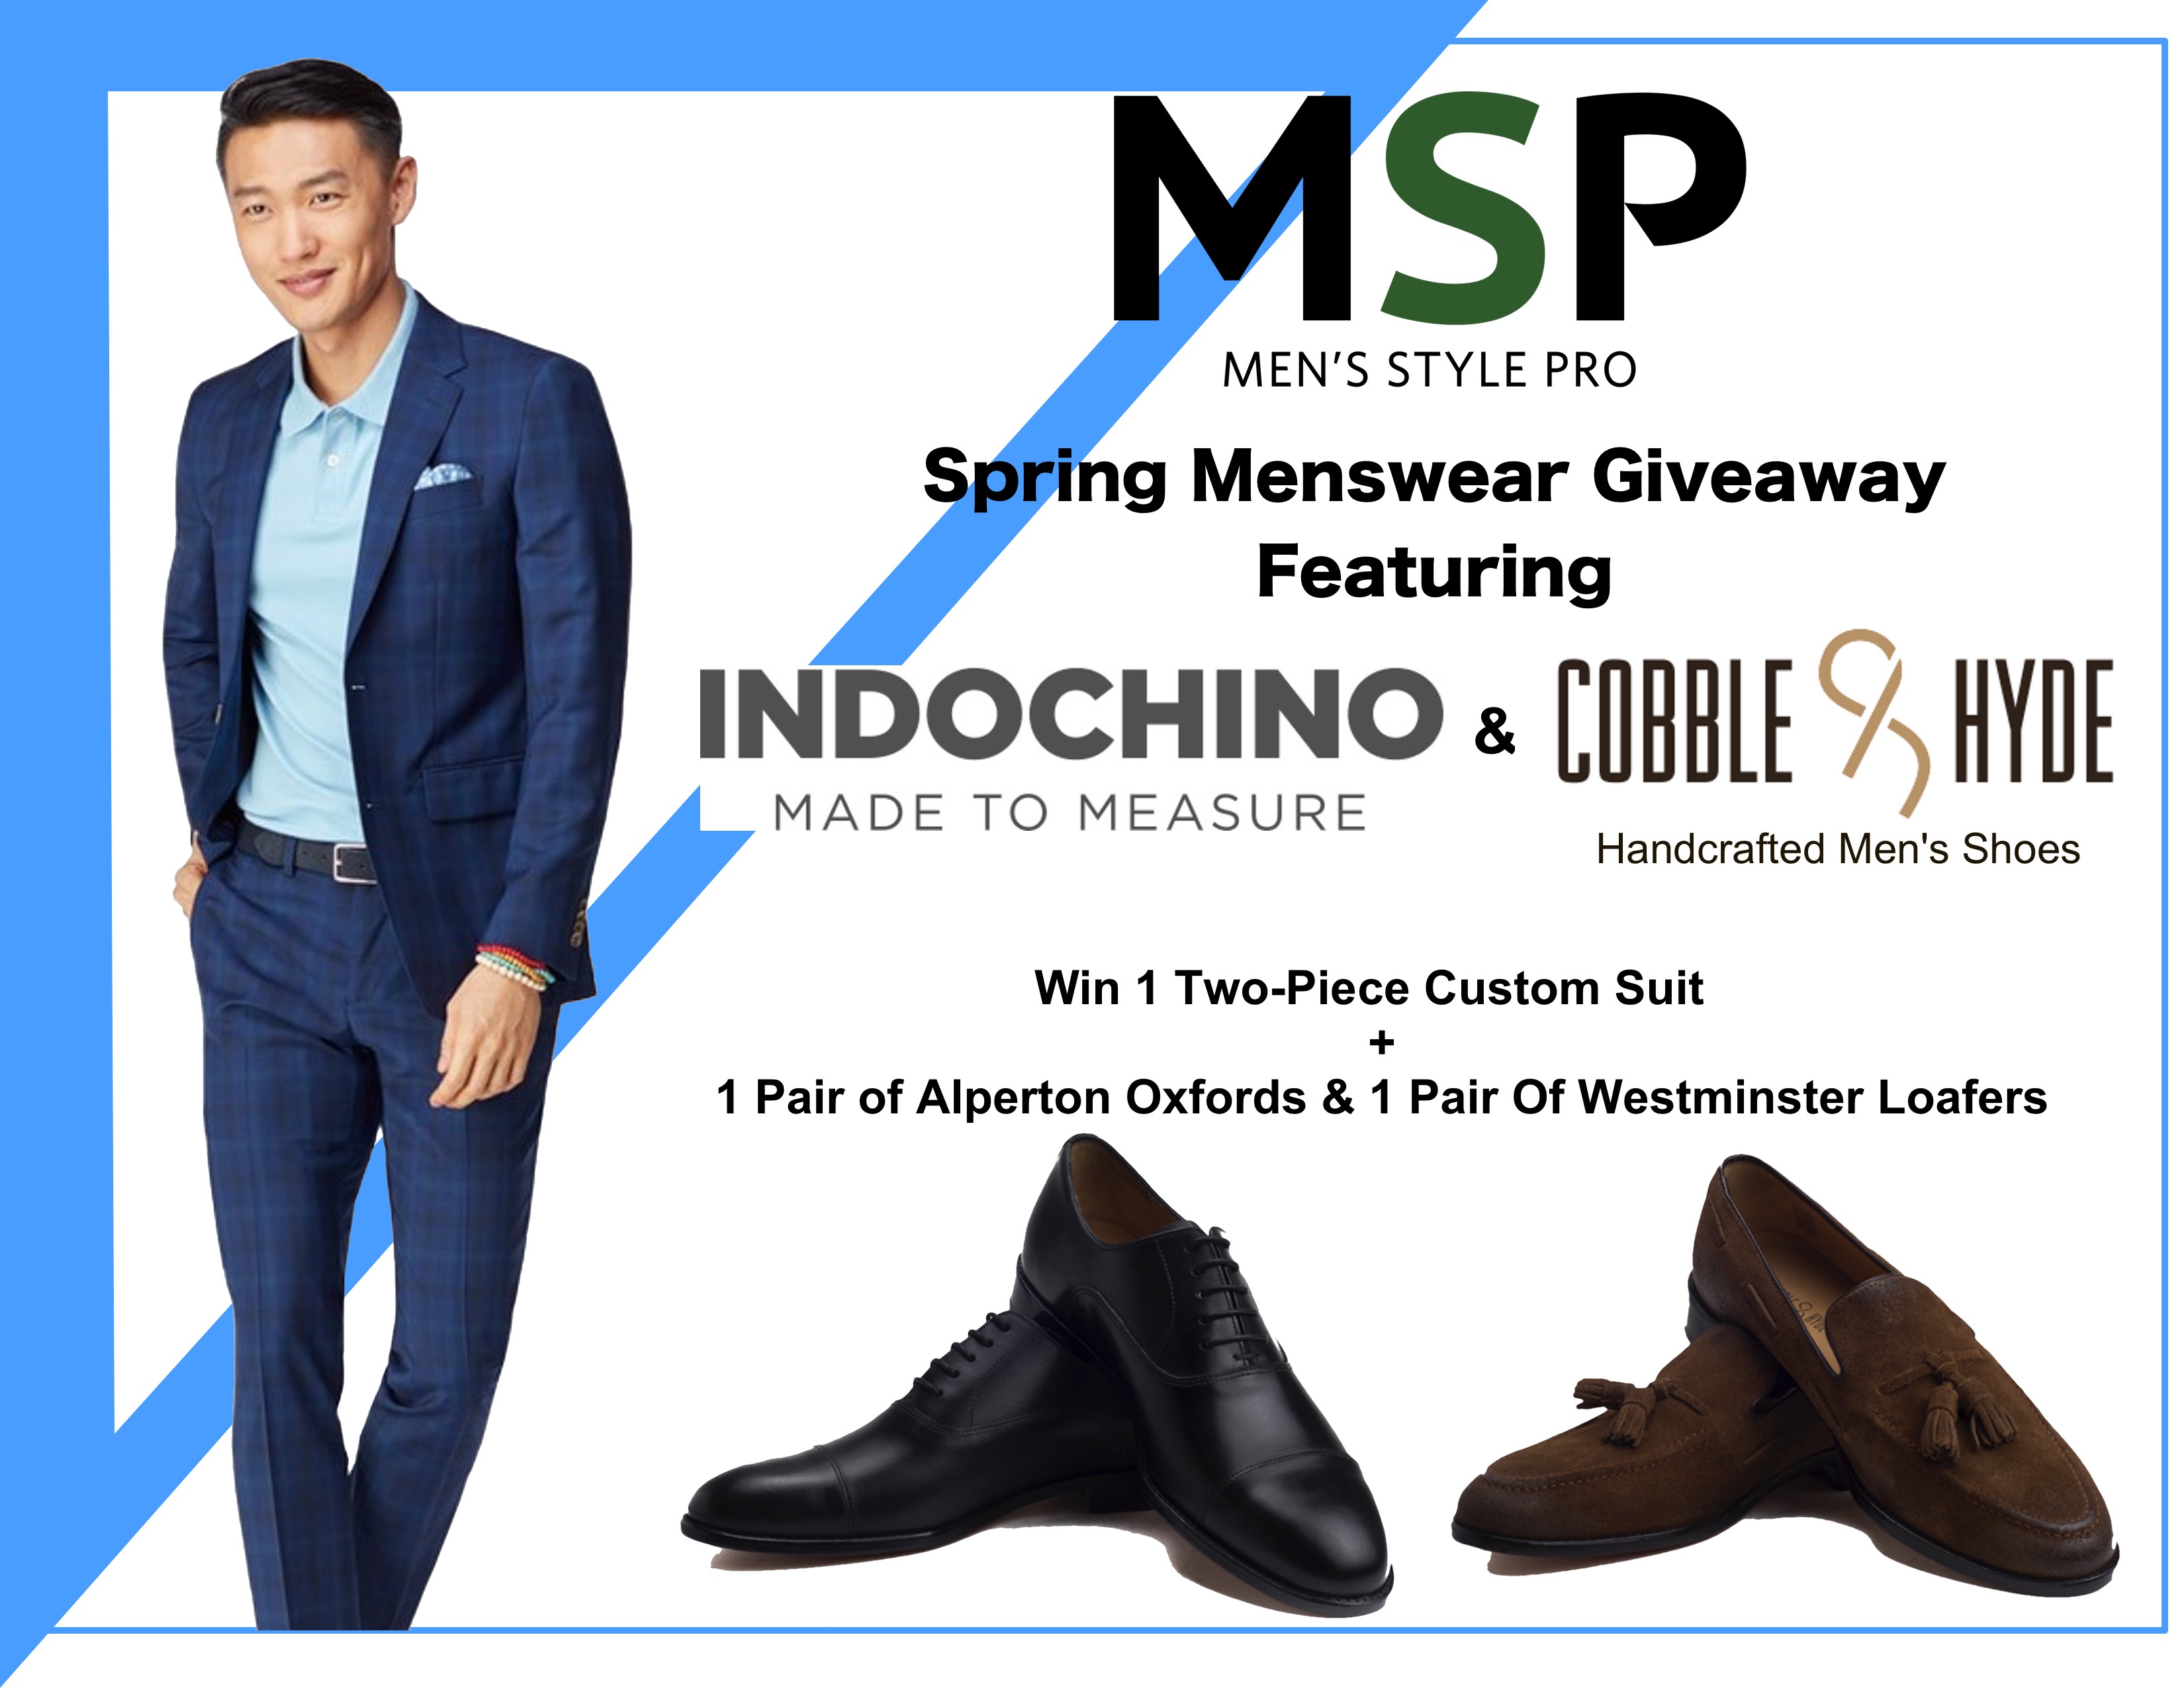 MSP Cobble & Hyde x Indochino Spring Menswear Giveaway